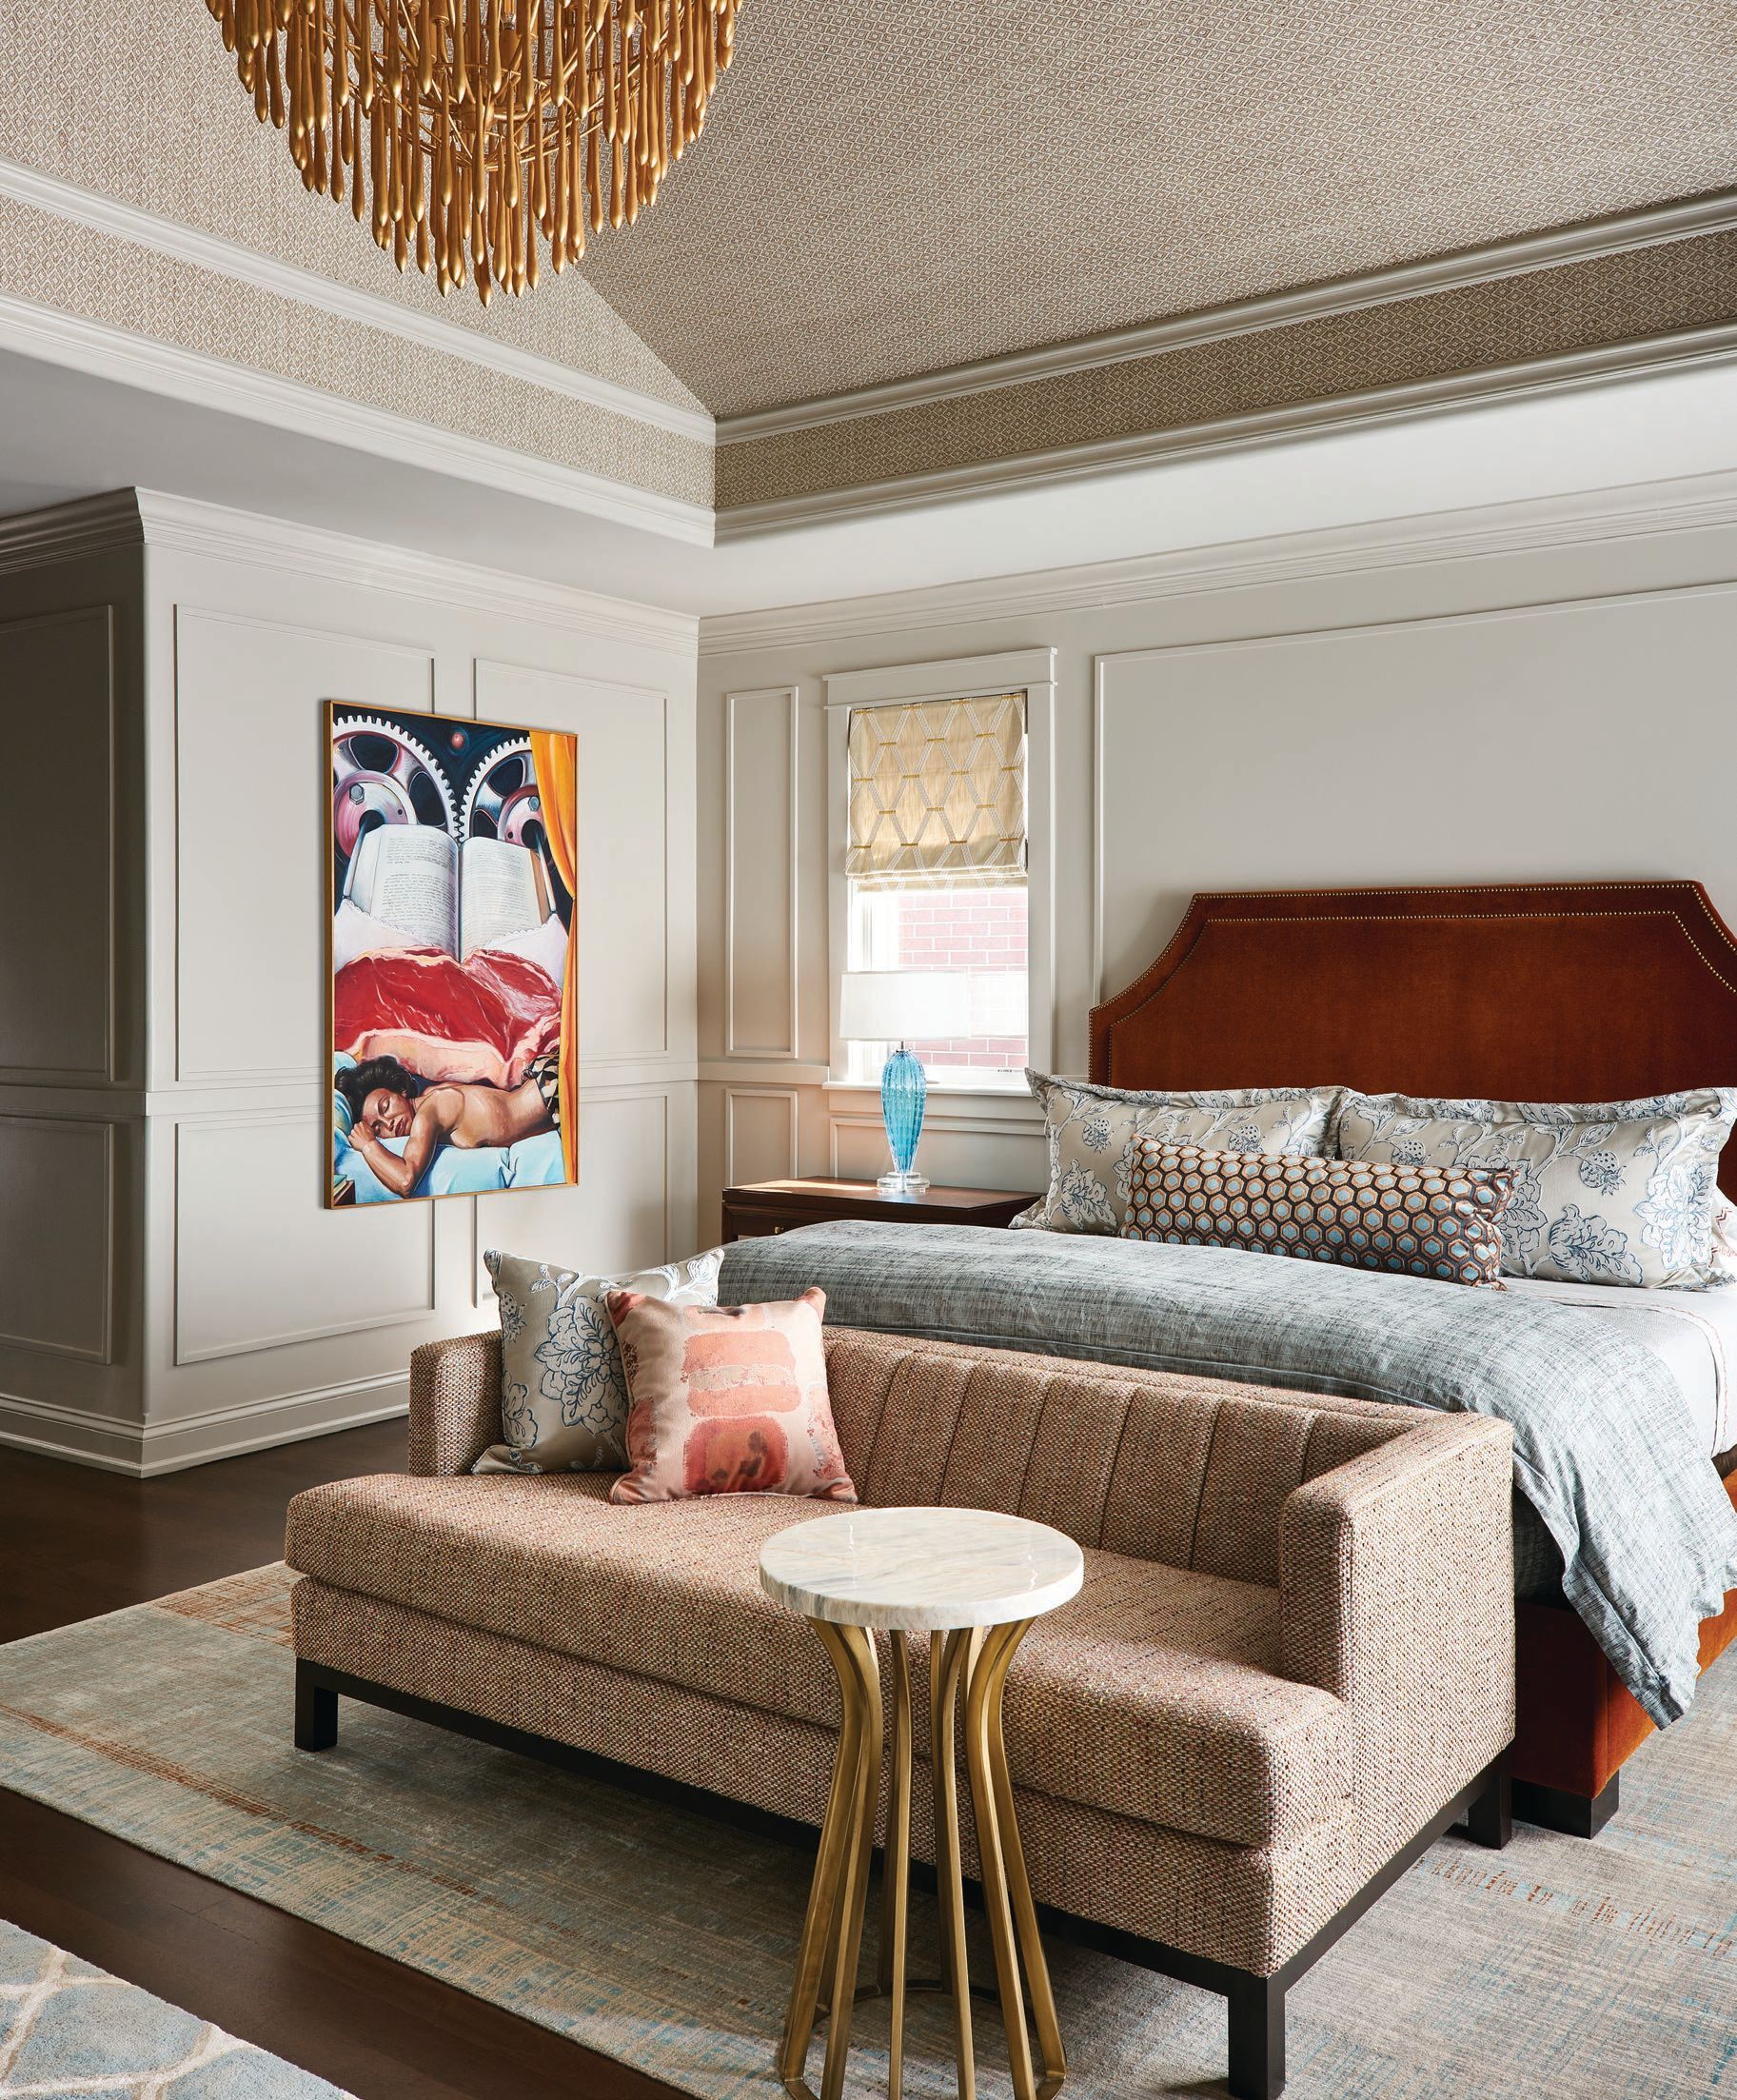 Phillip Jeffries’ Maldives Weave in Fauna covers the ceiling of the primary bedroom, which also features a custom settee by Kaufman Segal Design upholstered in Kravet’s Clarke & Clarke fabric in Louis Autumn; artwork by Peter Illig (peterillig.com); and a jarred marble side table by Palacek. Photographed by Ryan McDonald